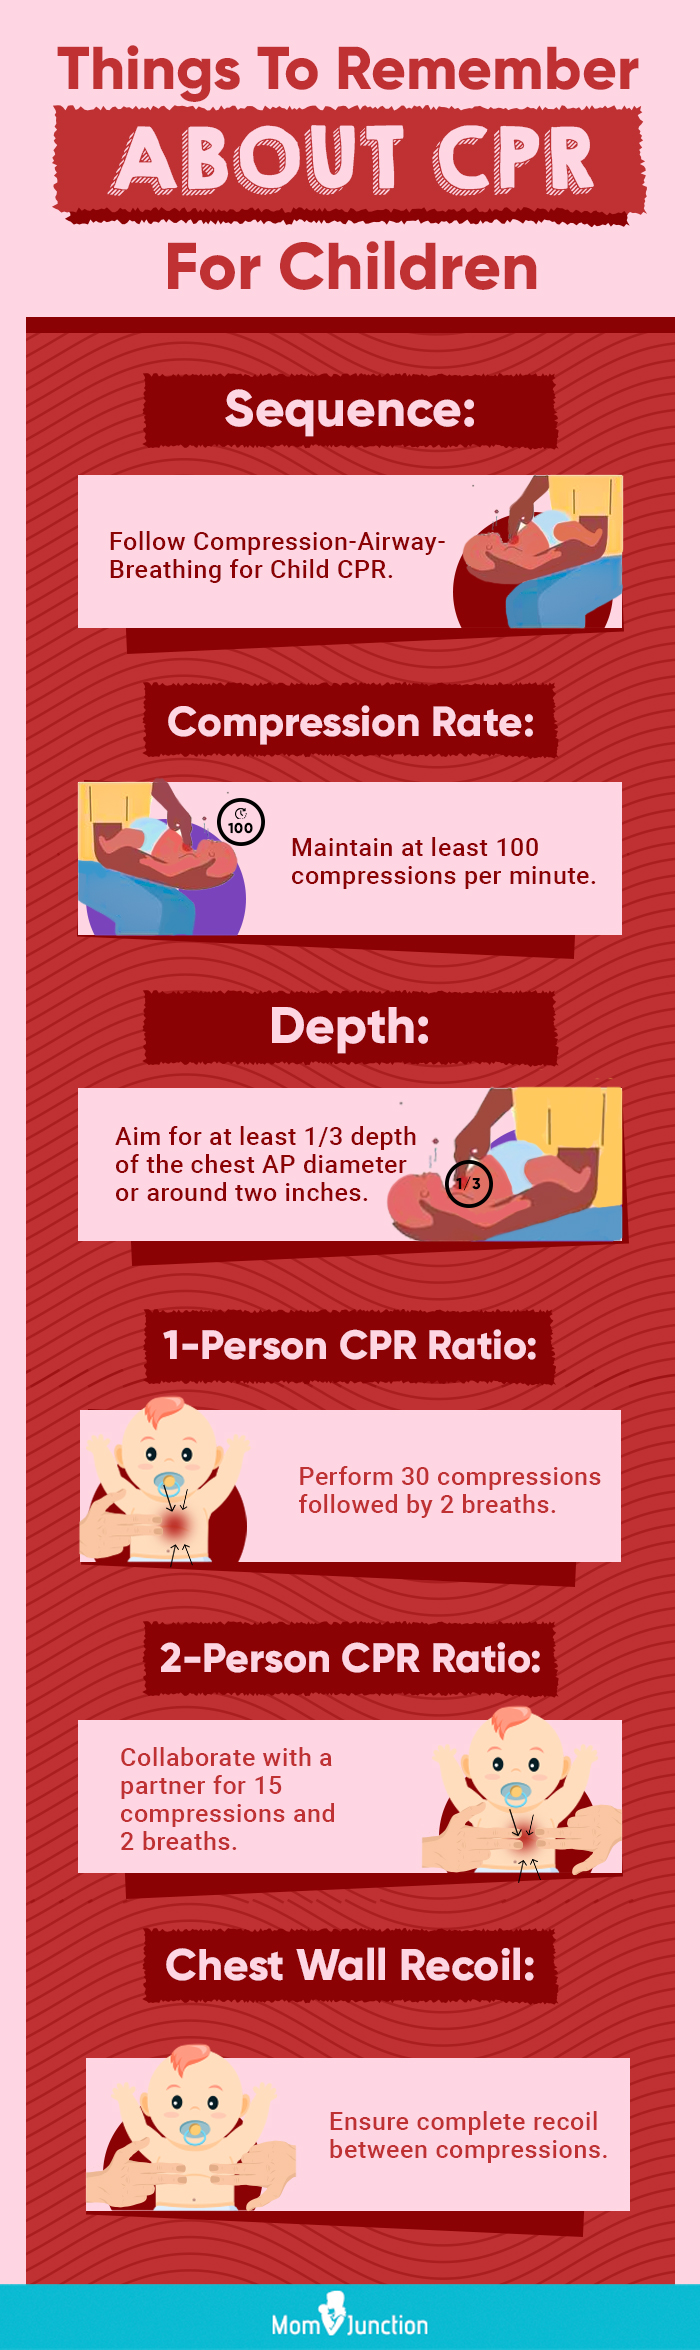 How To Perform Cardiopulmonary Resuscitation (CPR) In Children